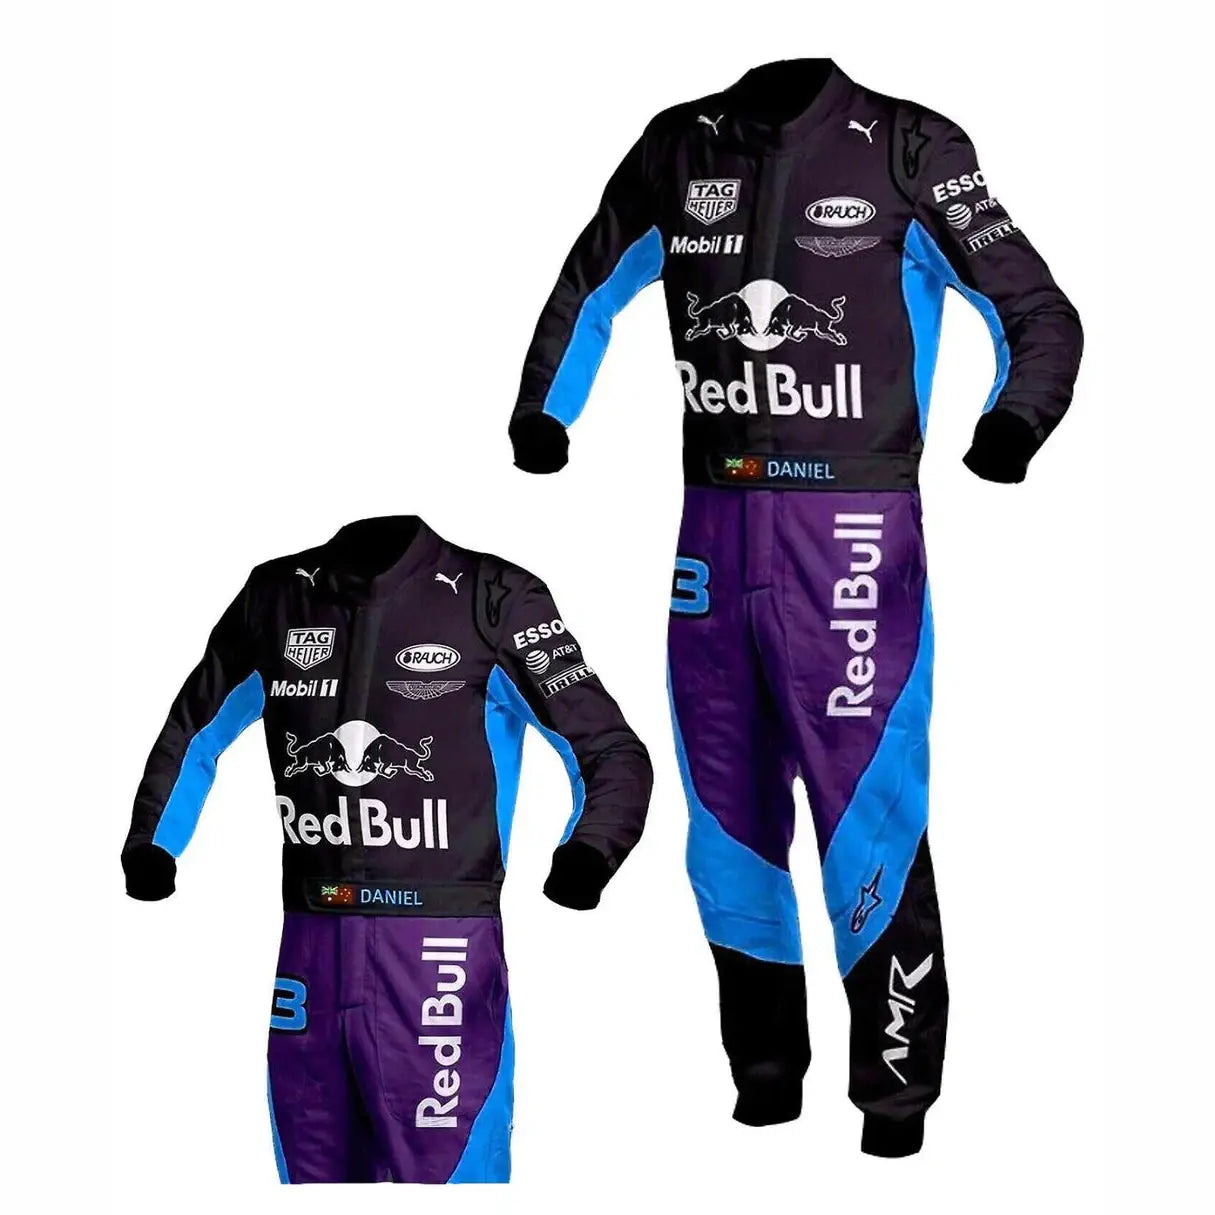 Go kart racing Sublimation Protective clothing Racing gear Suit N-06